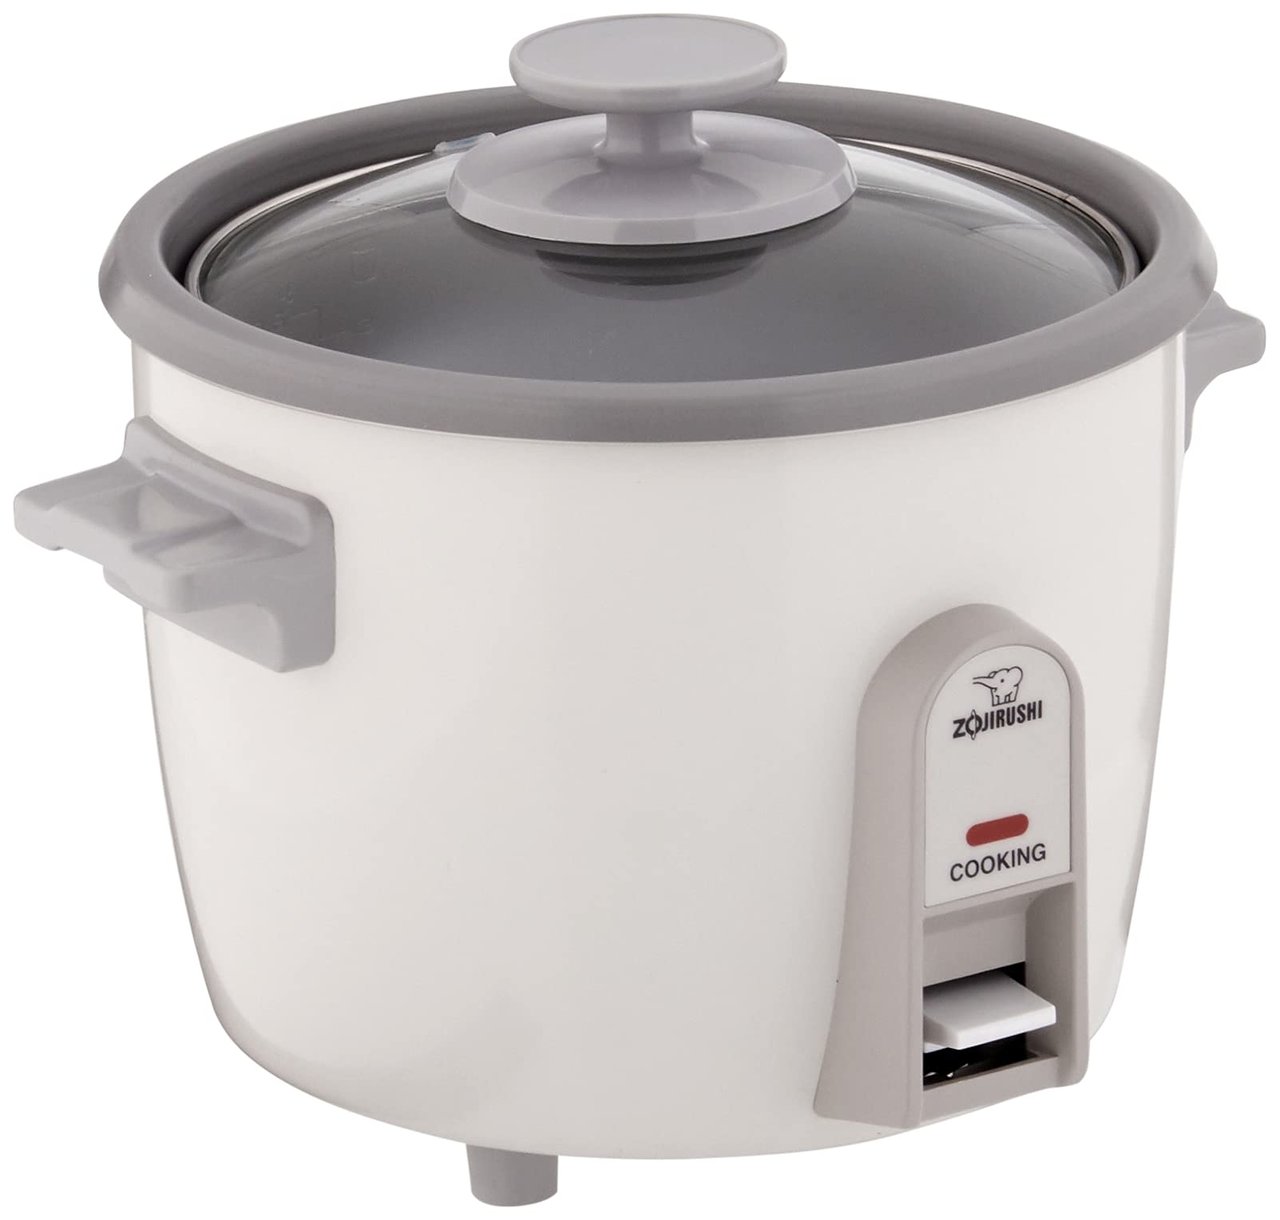 1 Zojirushi NHS-06 3-Cup (Uncooked) Rice Cooker, White (-WB)